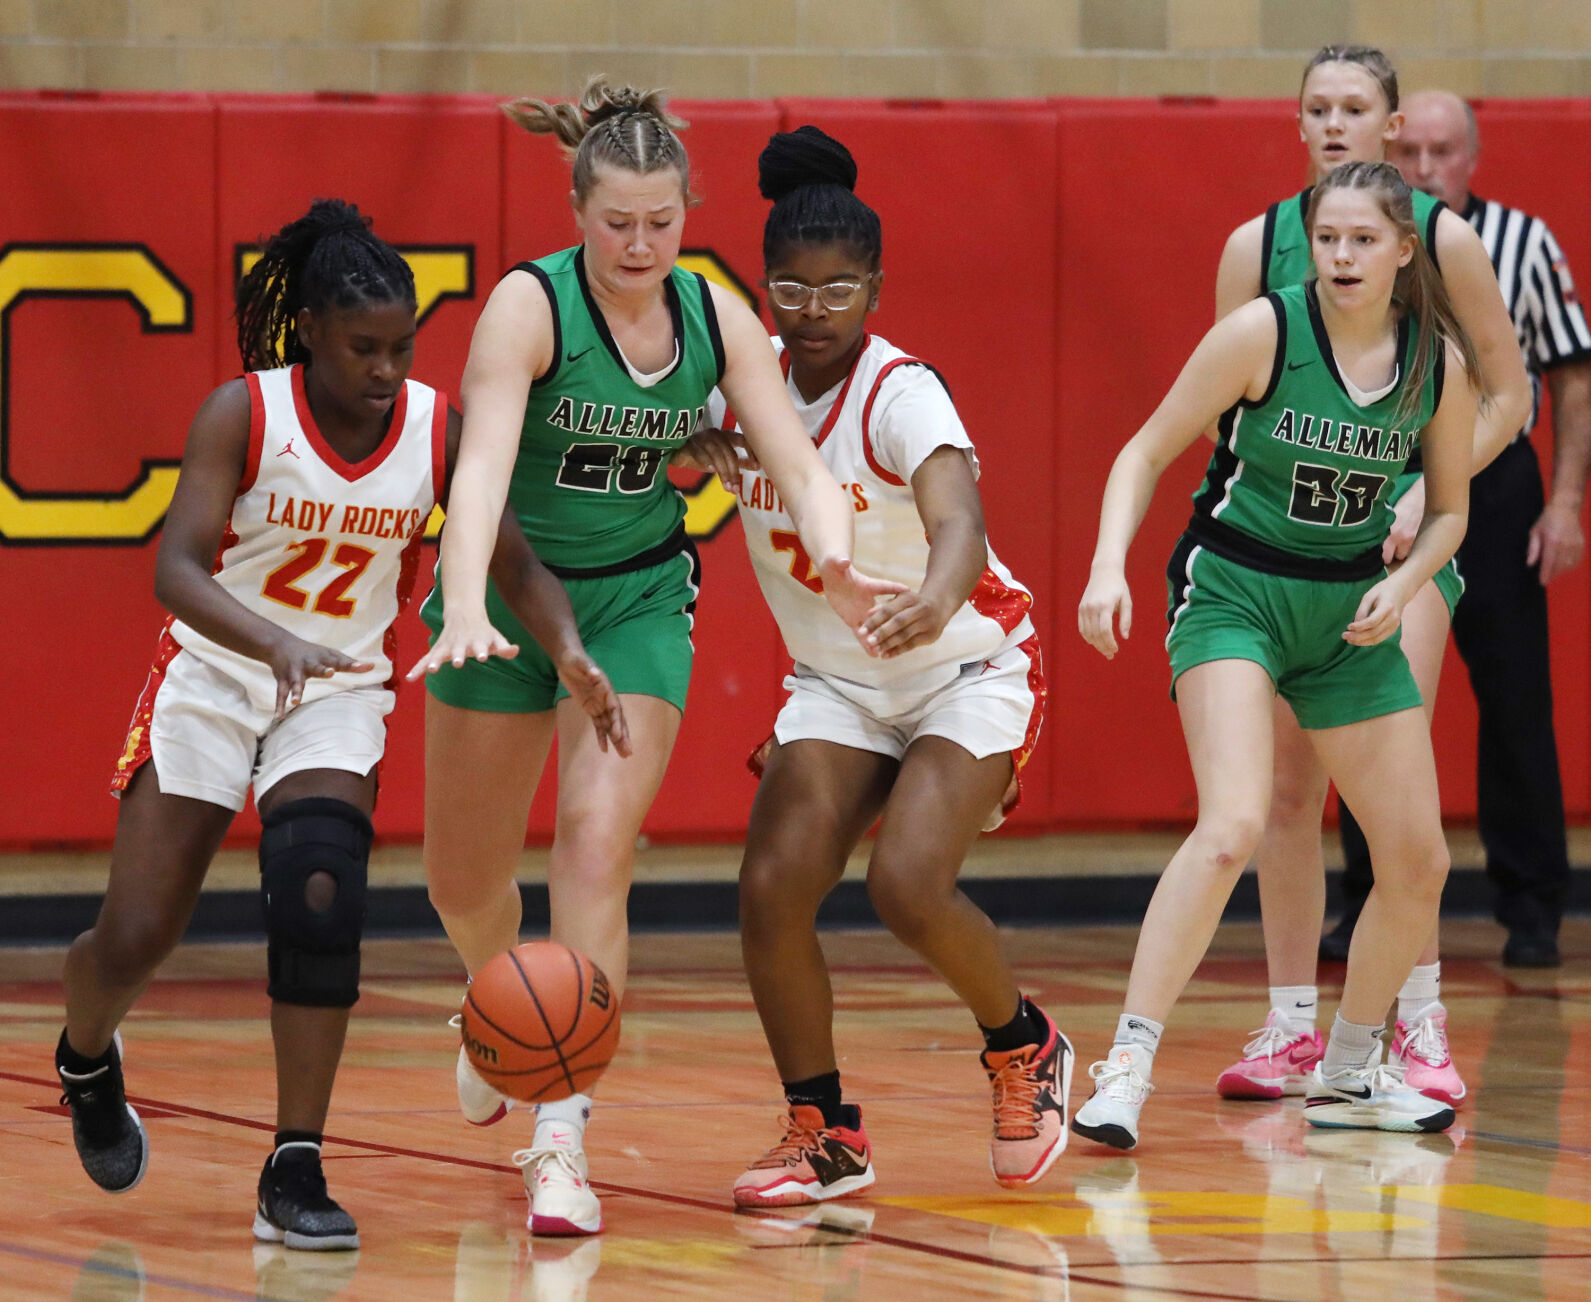 Alleman Pioneers Dominate with 47-29 Victory Over Rock Island Lady Rocks